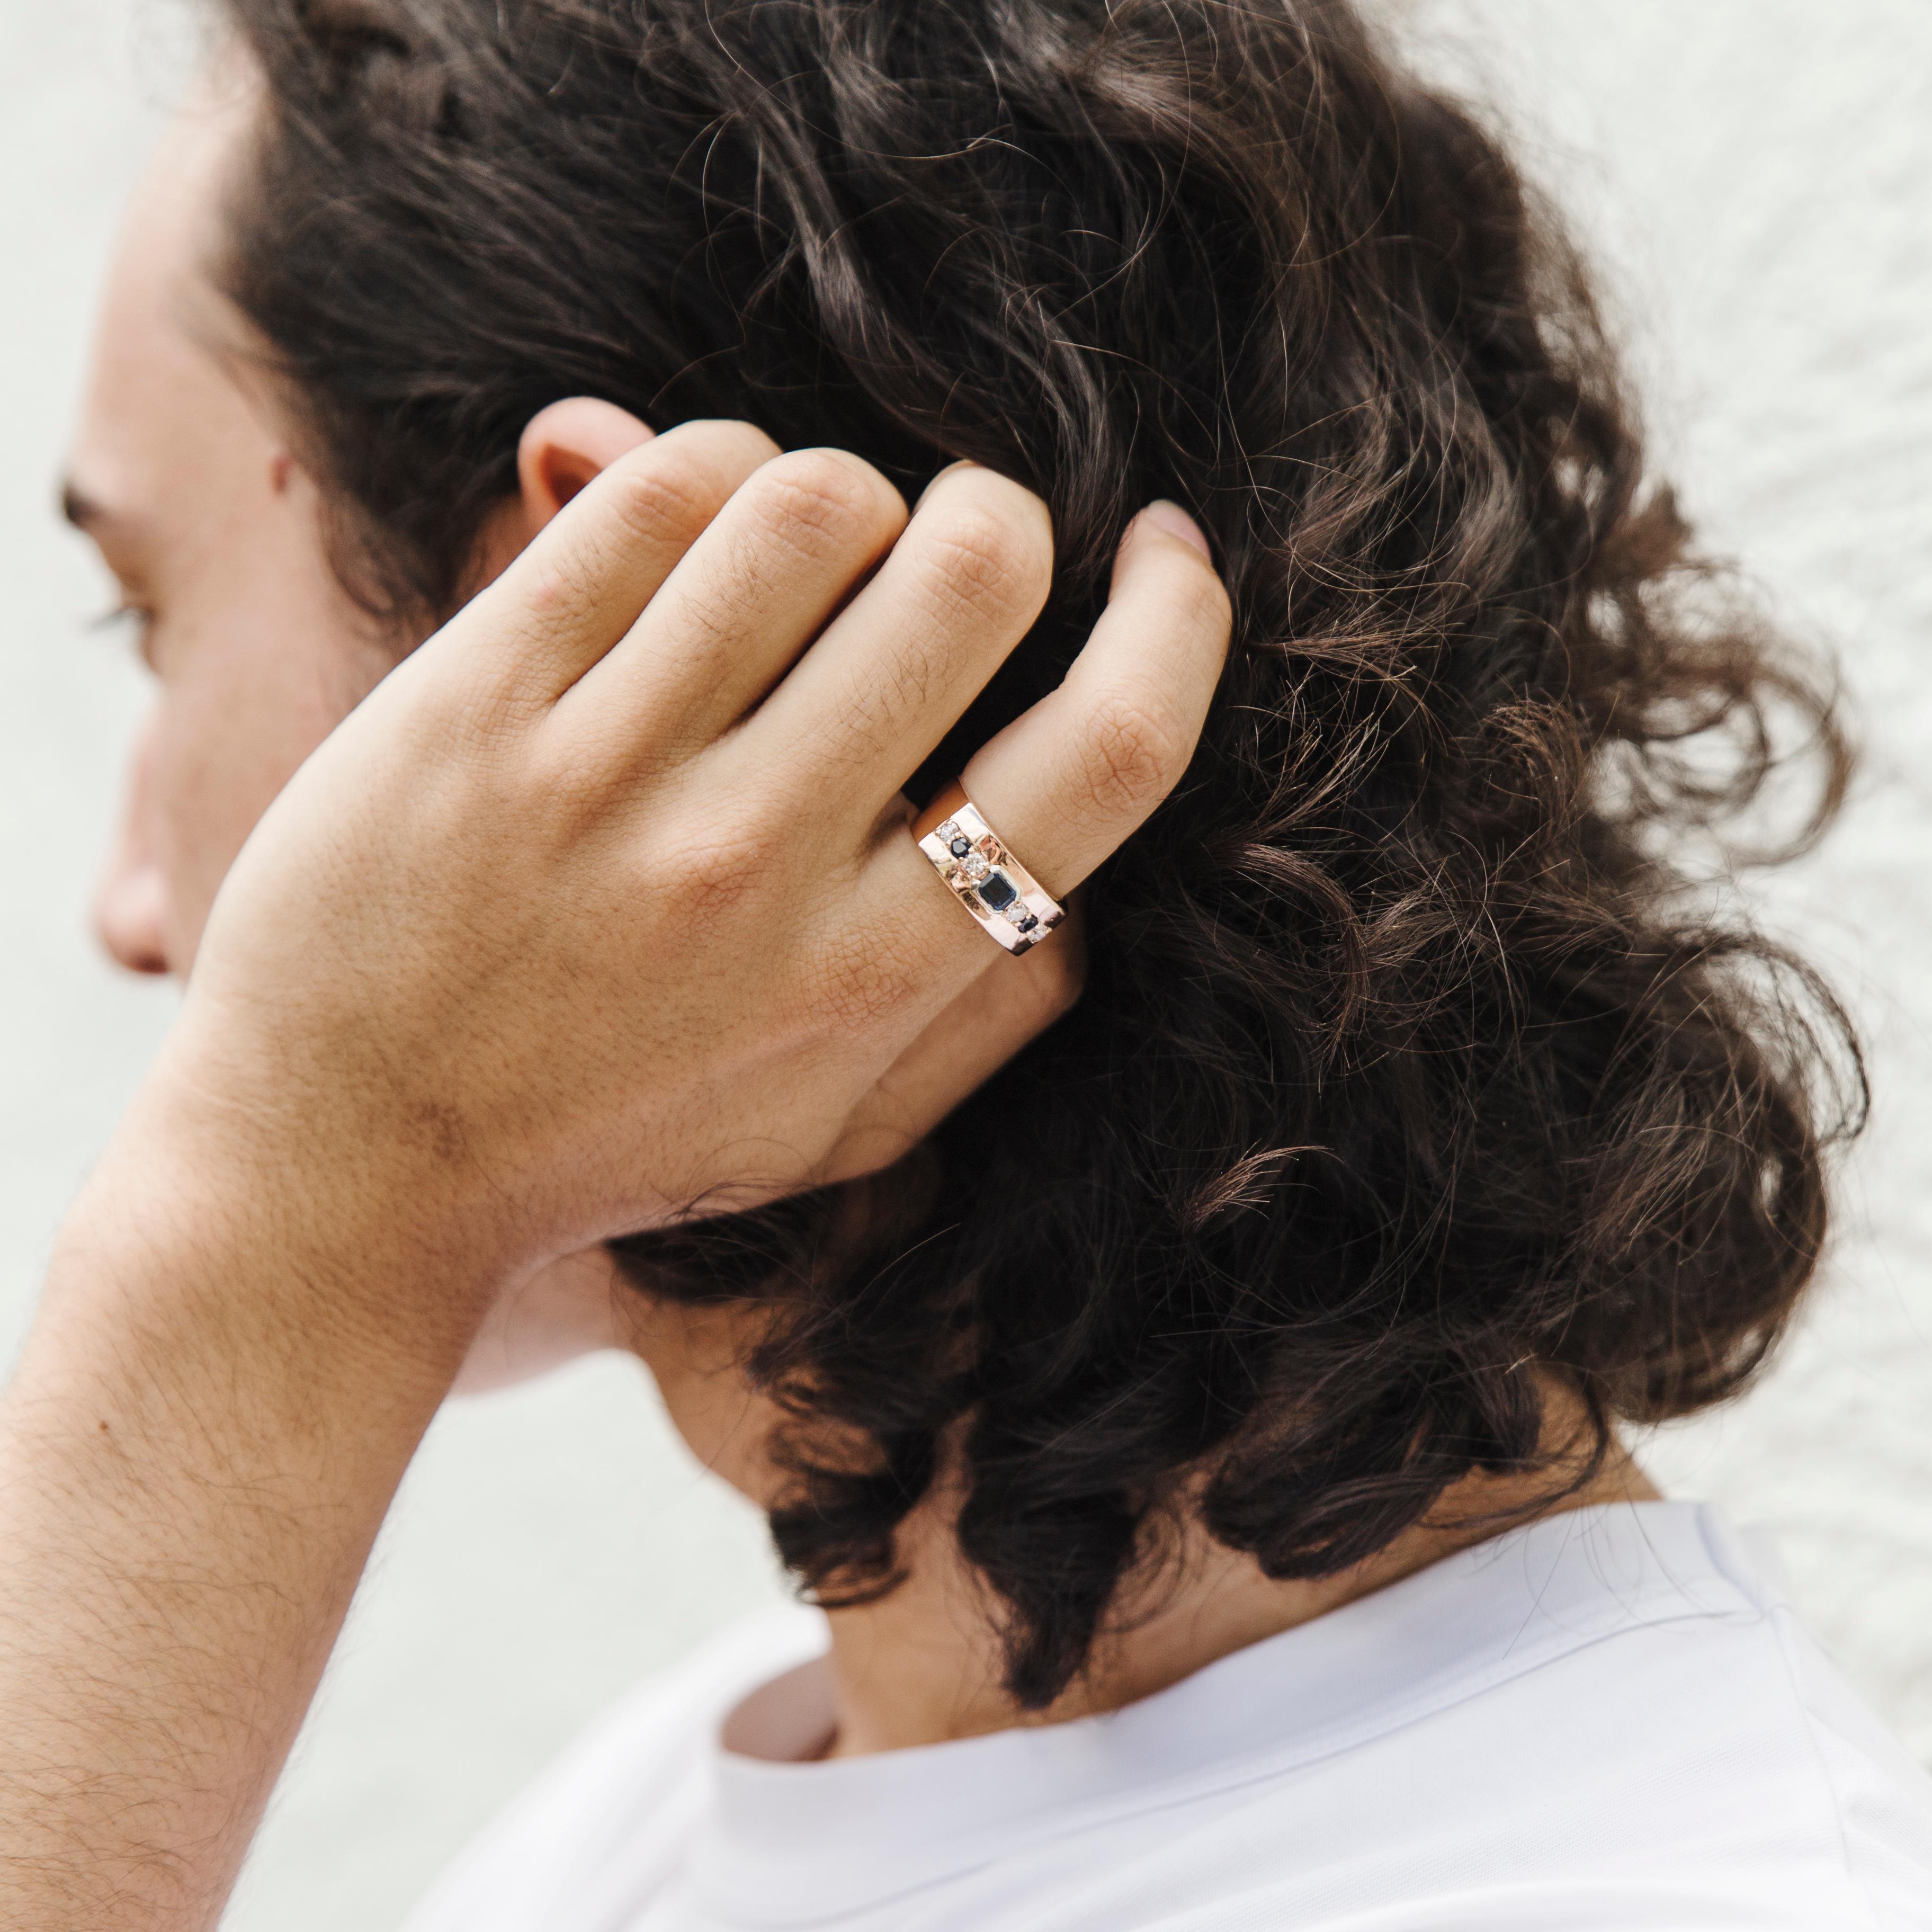 Forged in 9 carat rose gold, this handsome vintage ring sports a smooth reflective finish and set with a deep blue emerald cut sapphire flanked by two smaller sapphires and round brilliant diamonds. We have named this dapper band The Amos Ring. The